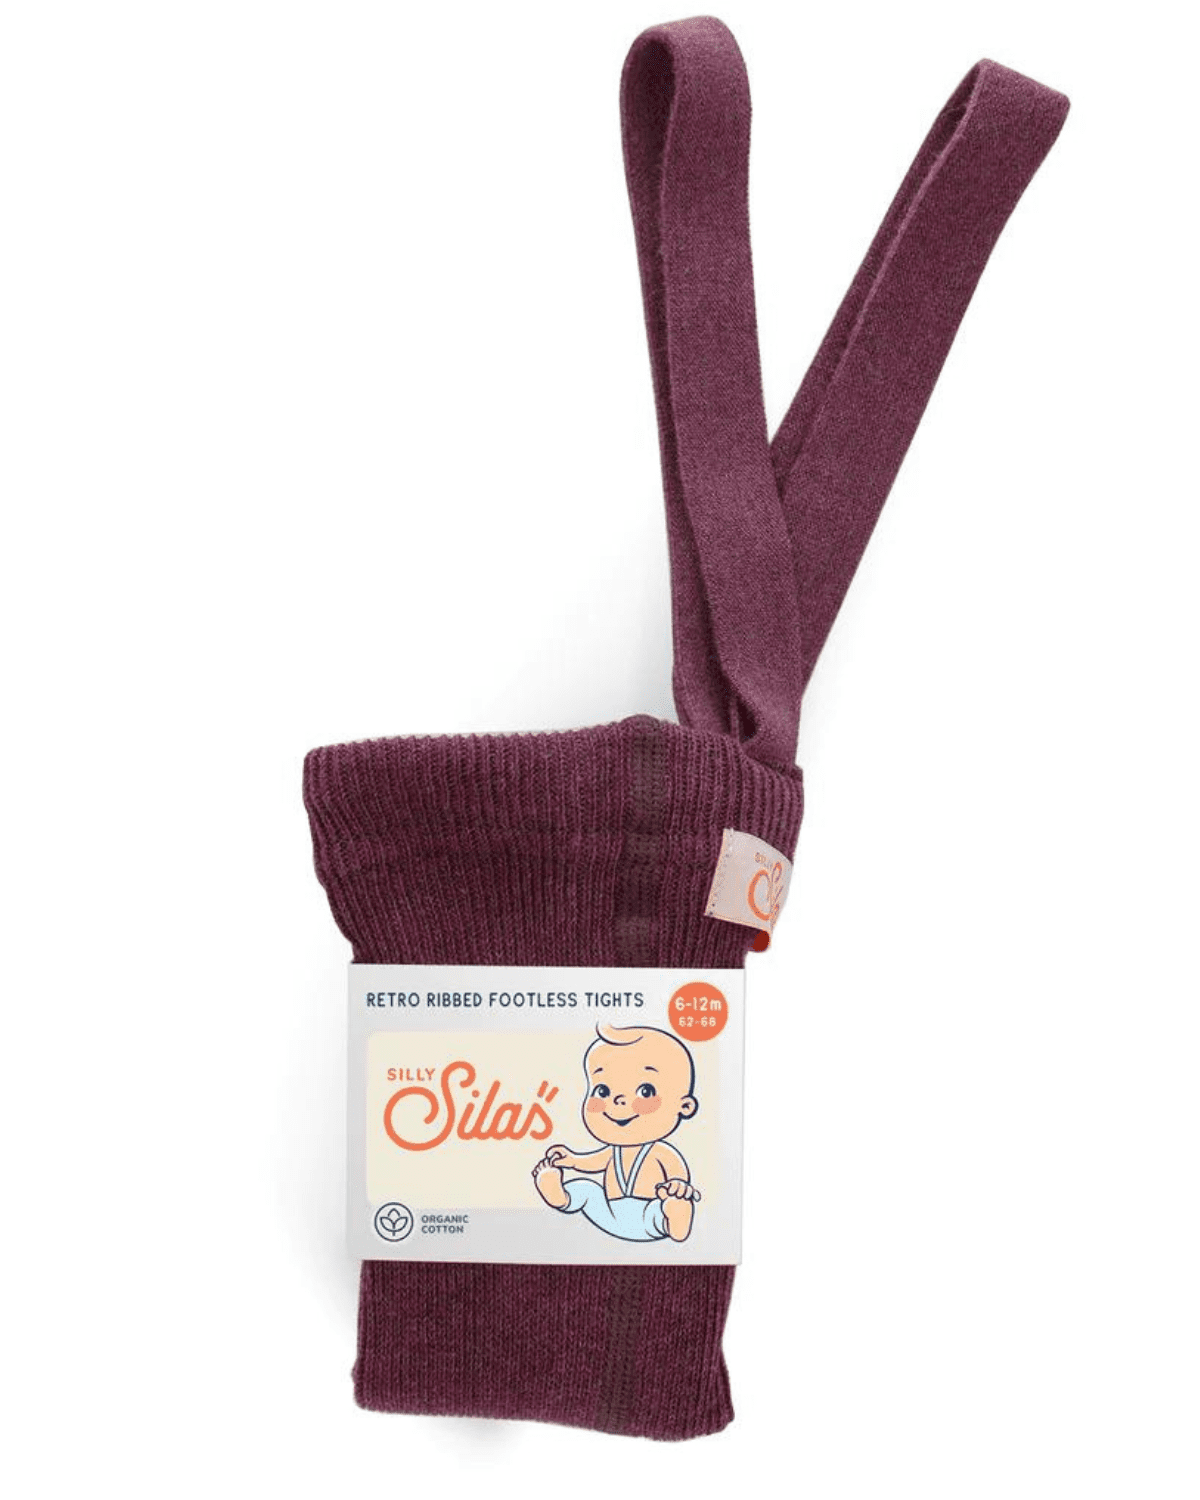 Baby Sweater Knit Legging Pants 100% Organic Cotton, Pocket, Soft, Cozy,  Comfy, Non-toxic, Eco-friendly 